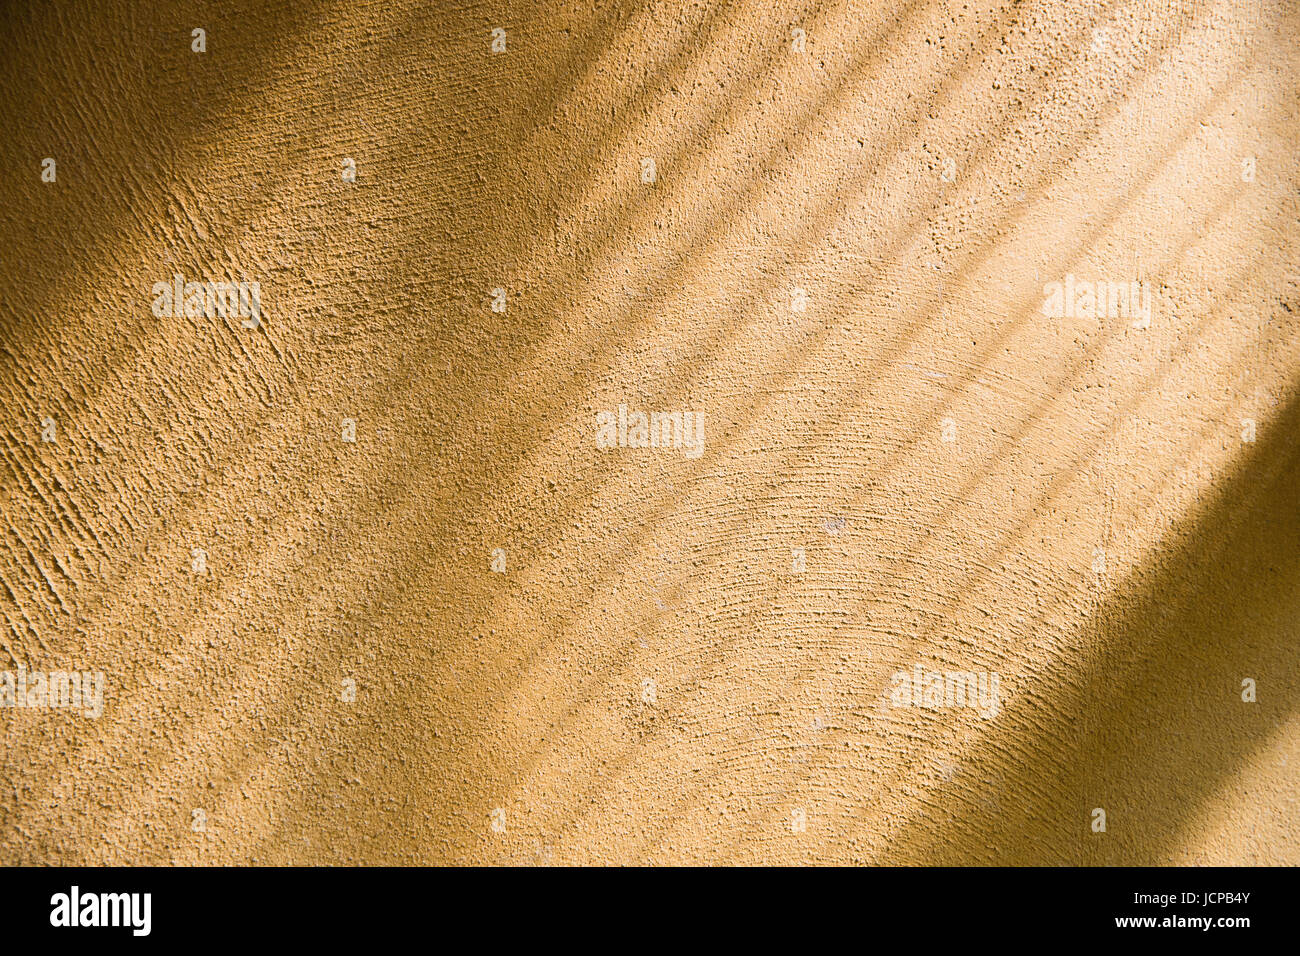 Diagonal shade and light from window curtain onto yellow rough surface wall. Stock Photo